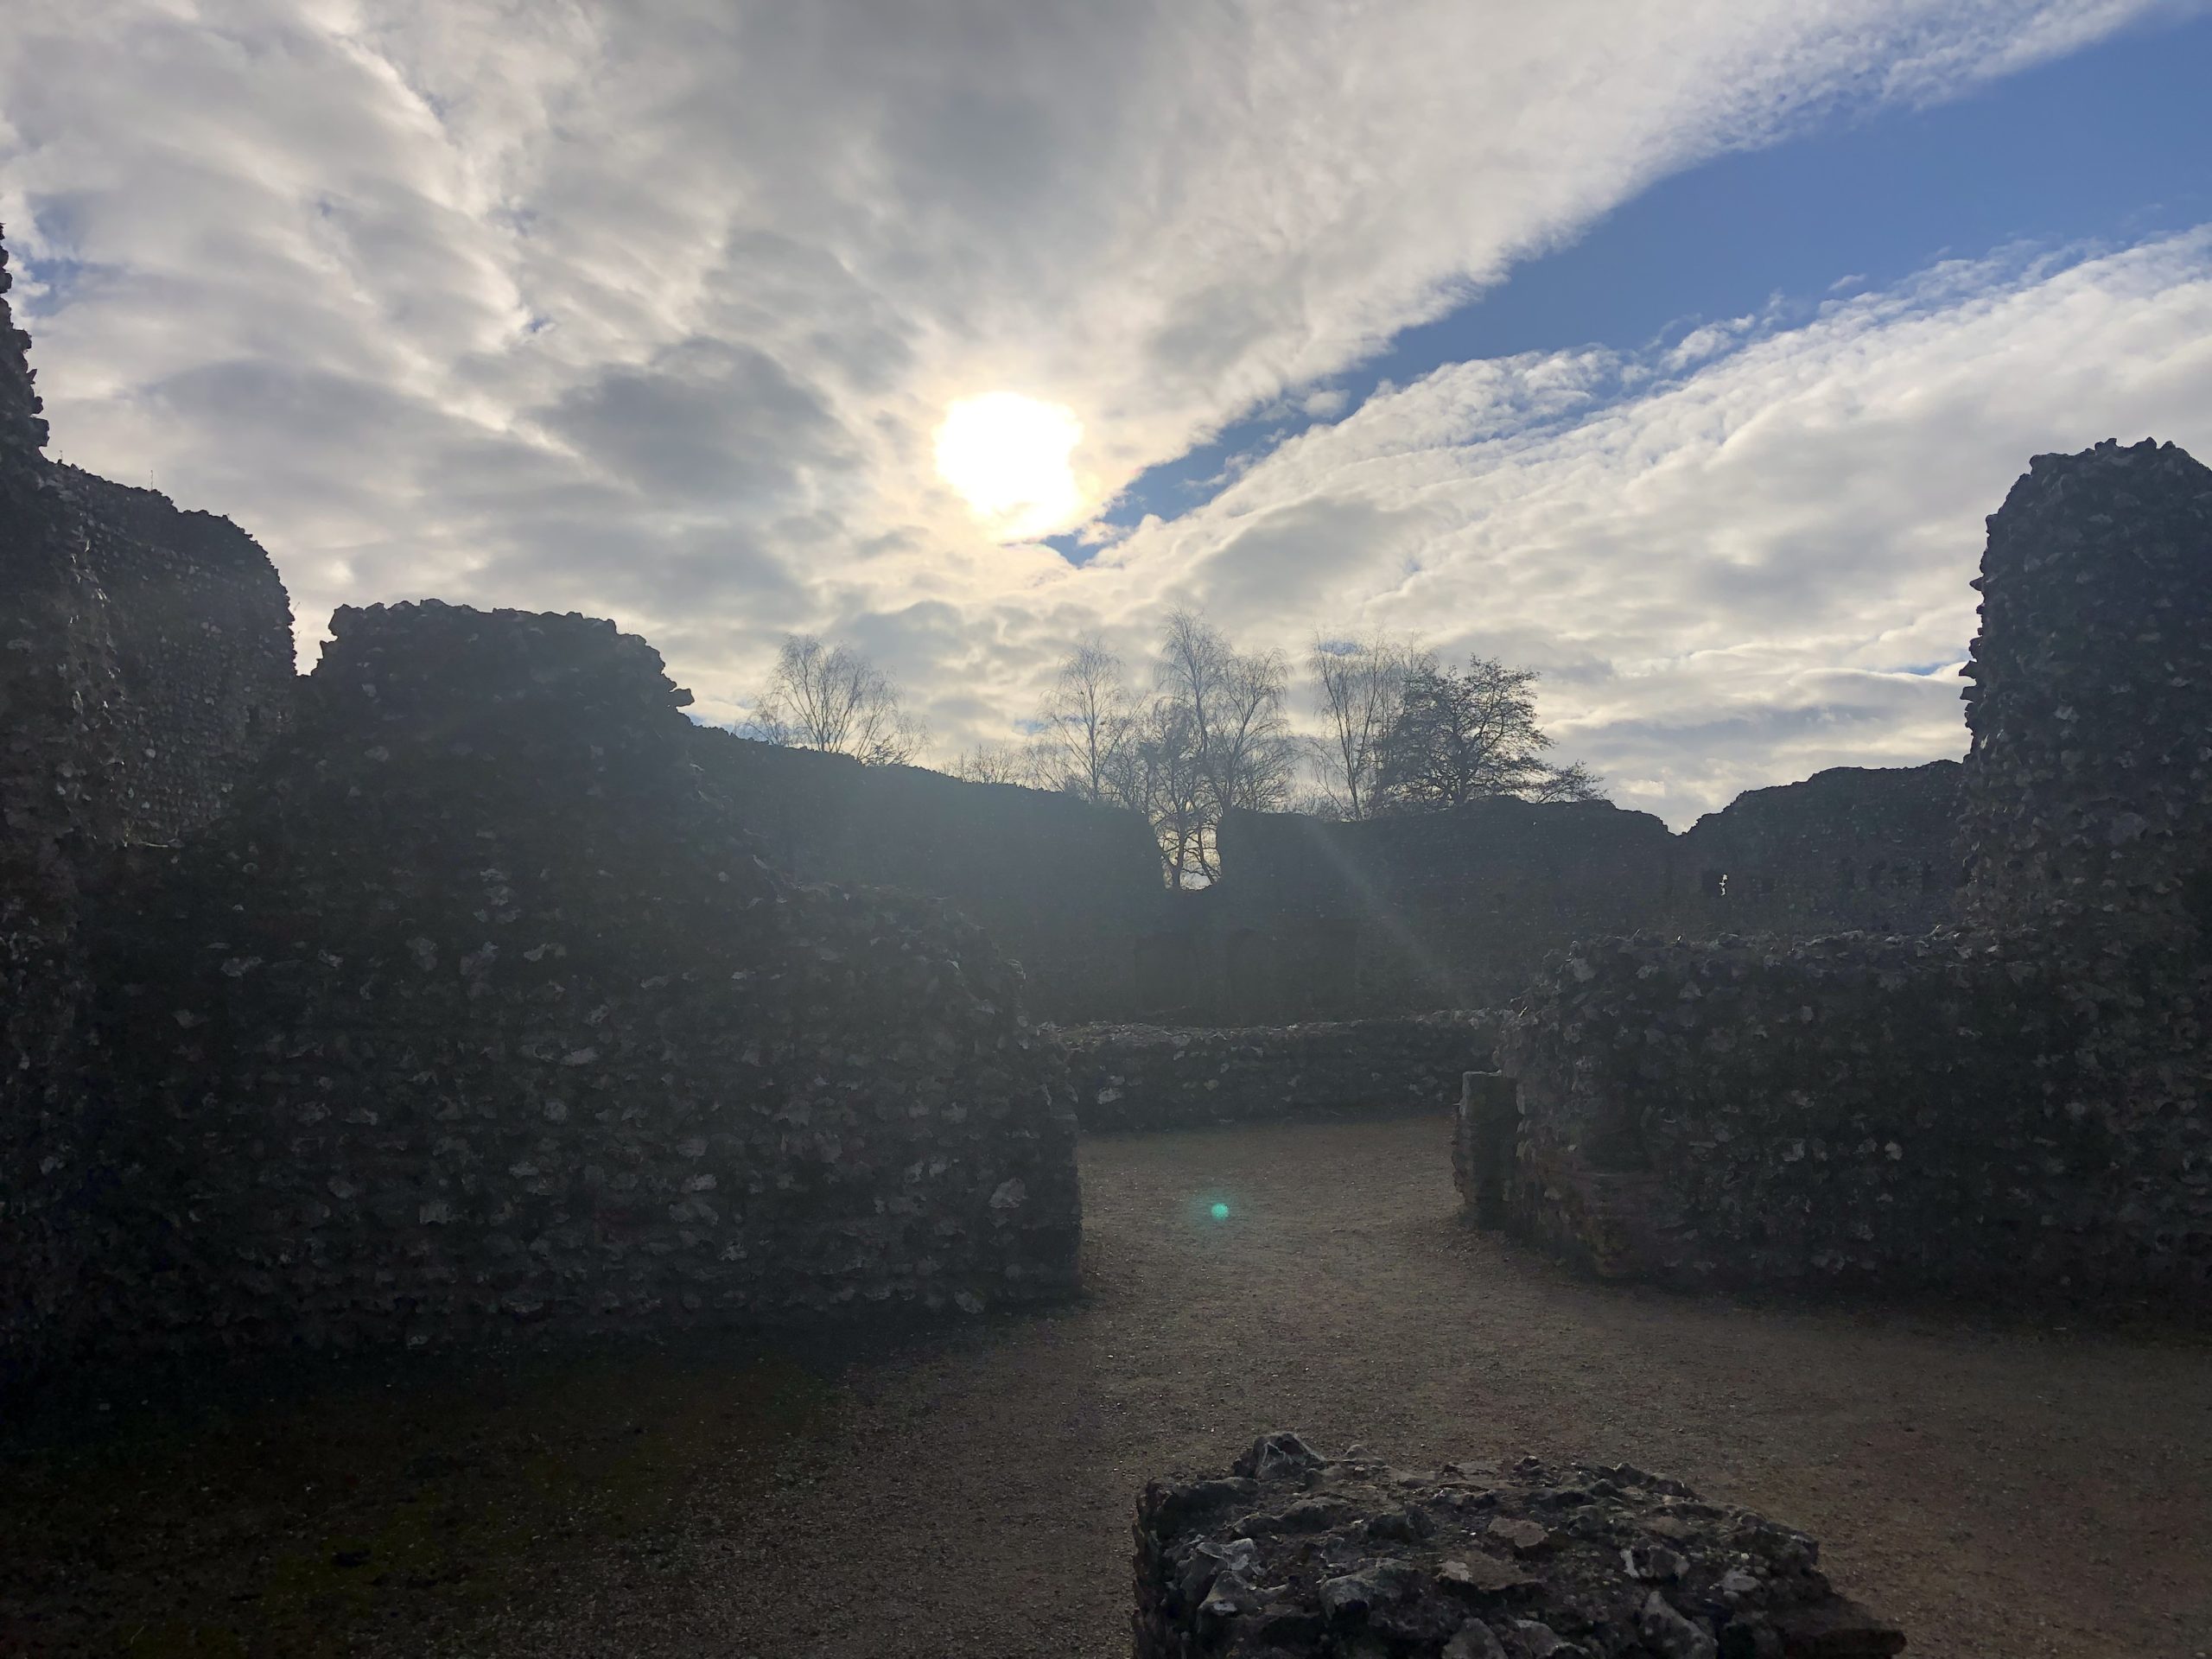 Sun breaking through clouds over old ruin